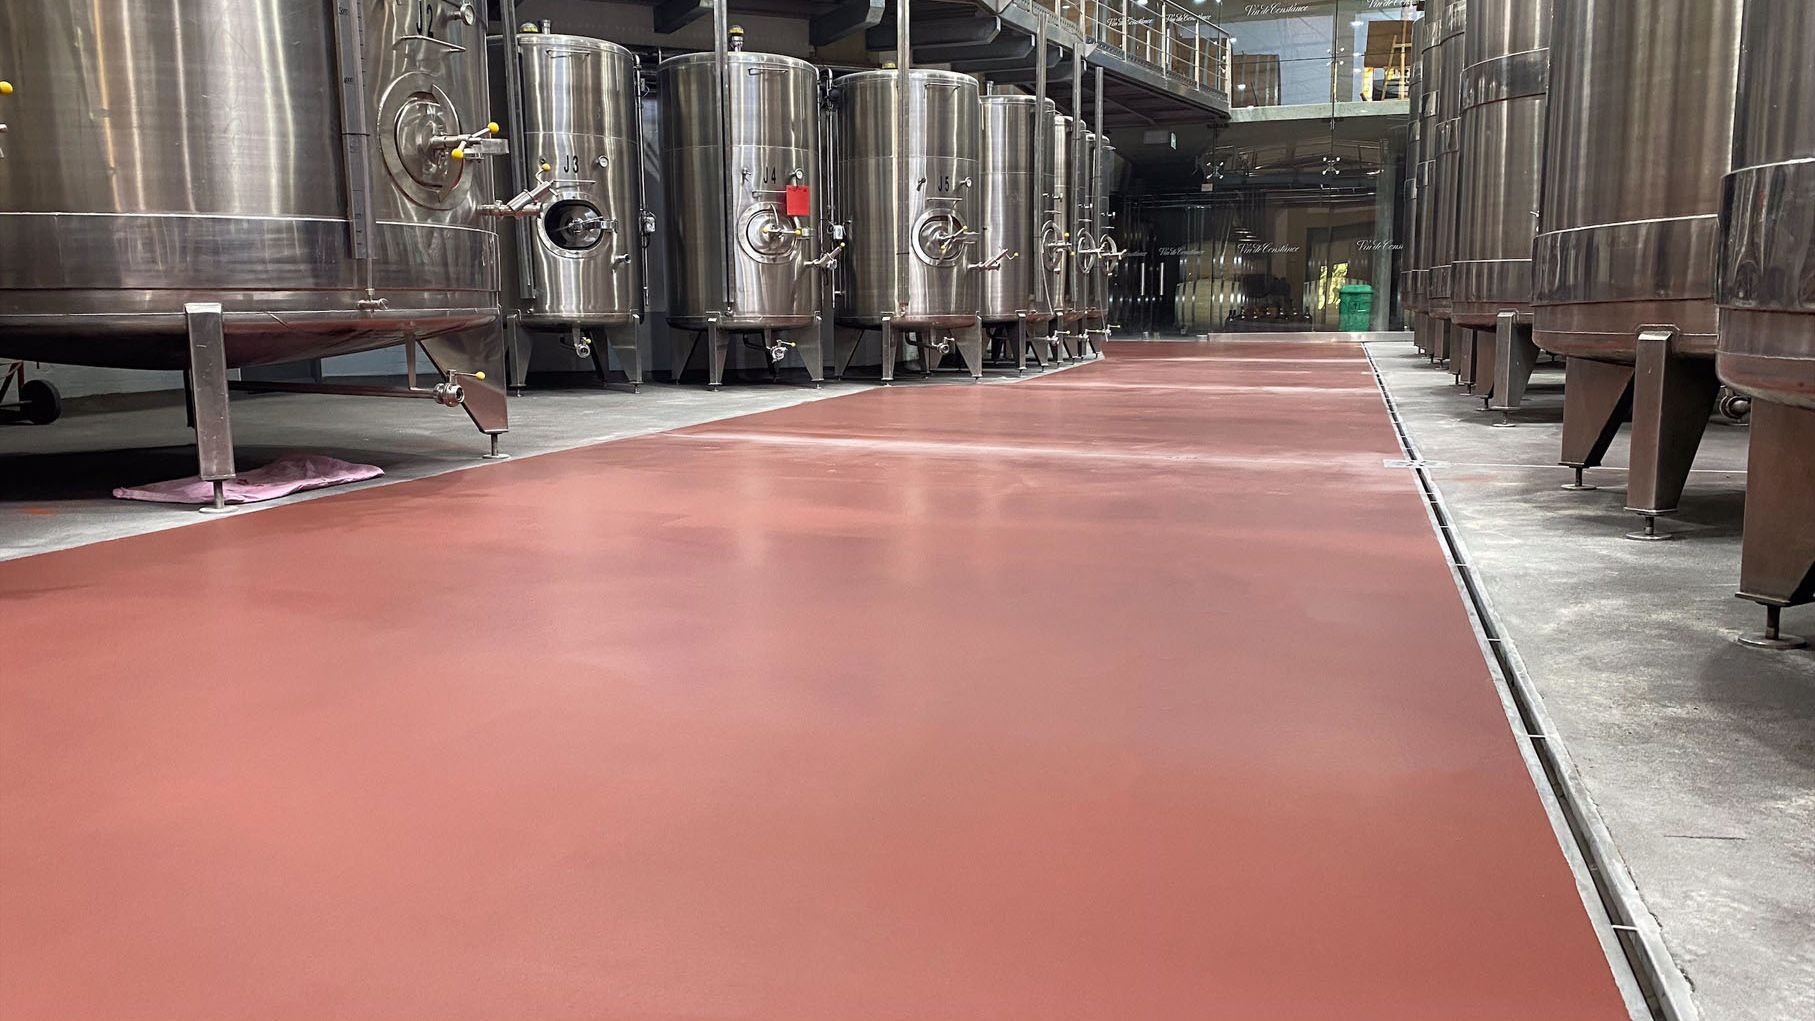 Polyurethane hybrid flooring at Klein Constantia wine estate in Cape Town. Slip resistant flooring that allows for steam cleaning and can withstand high impact.